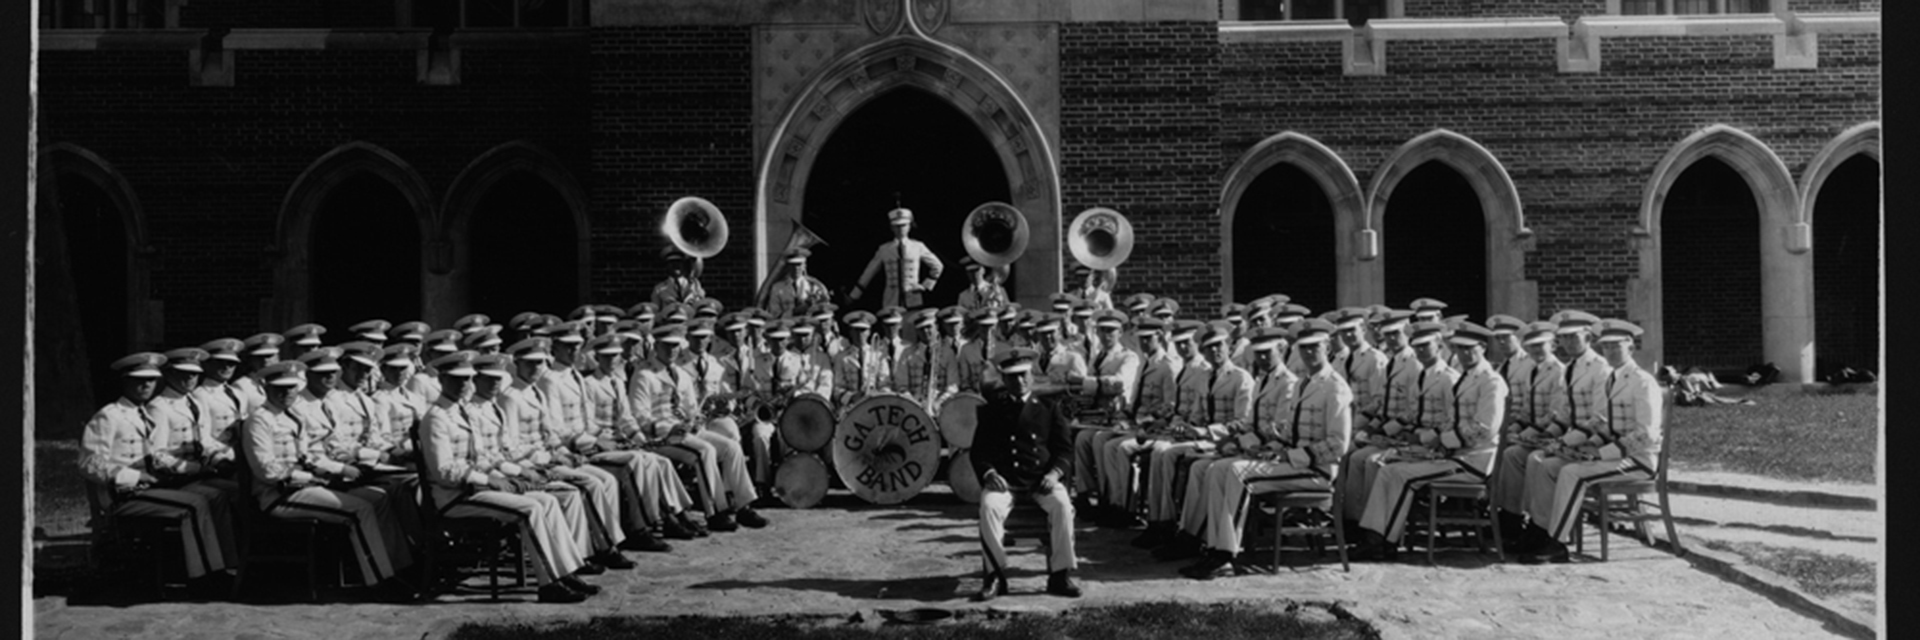 A historical black and white photo of the Georgia Tech band.